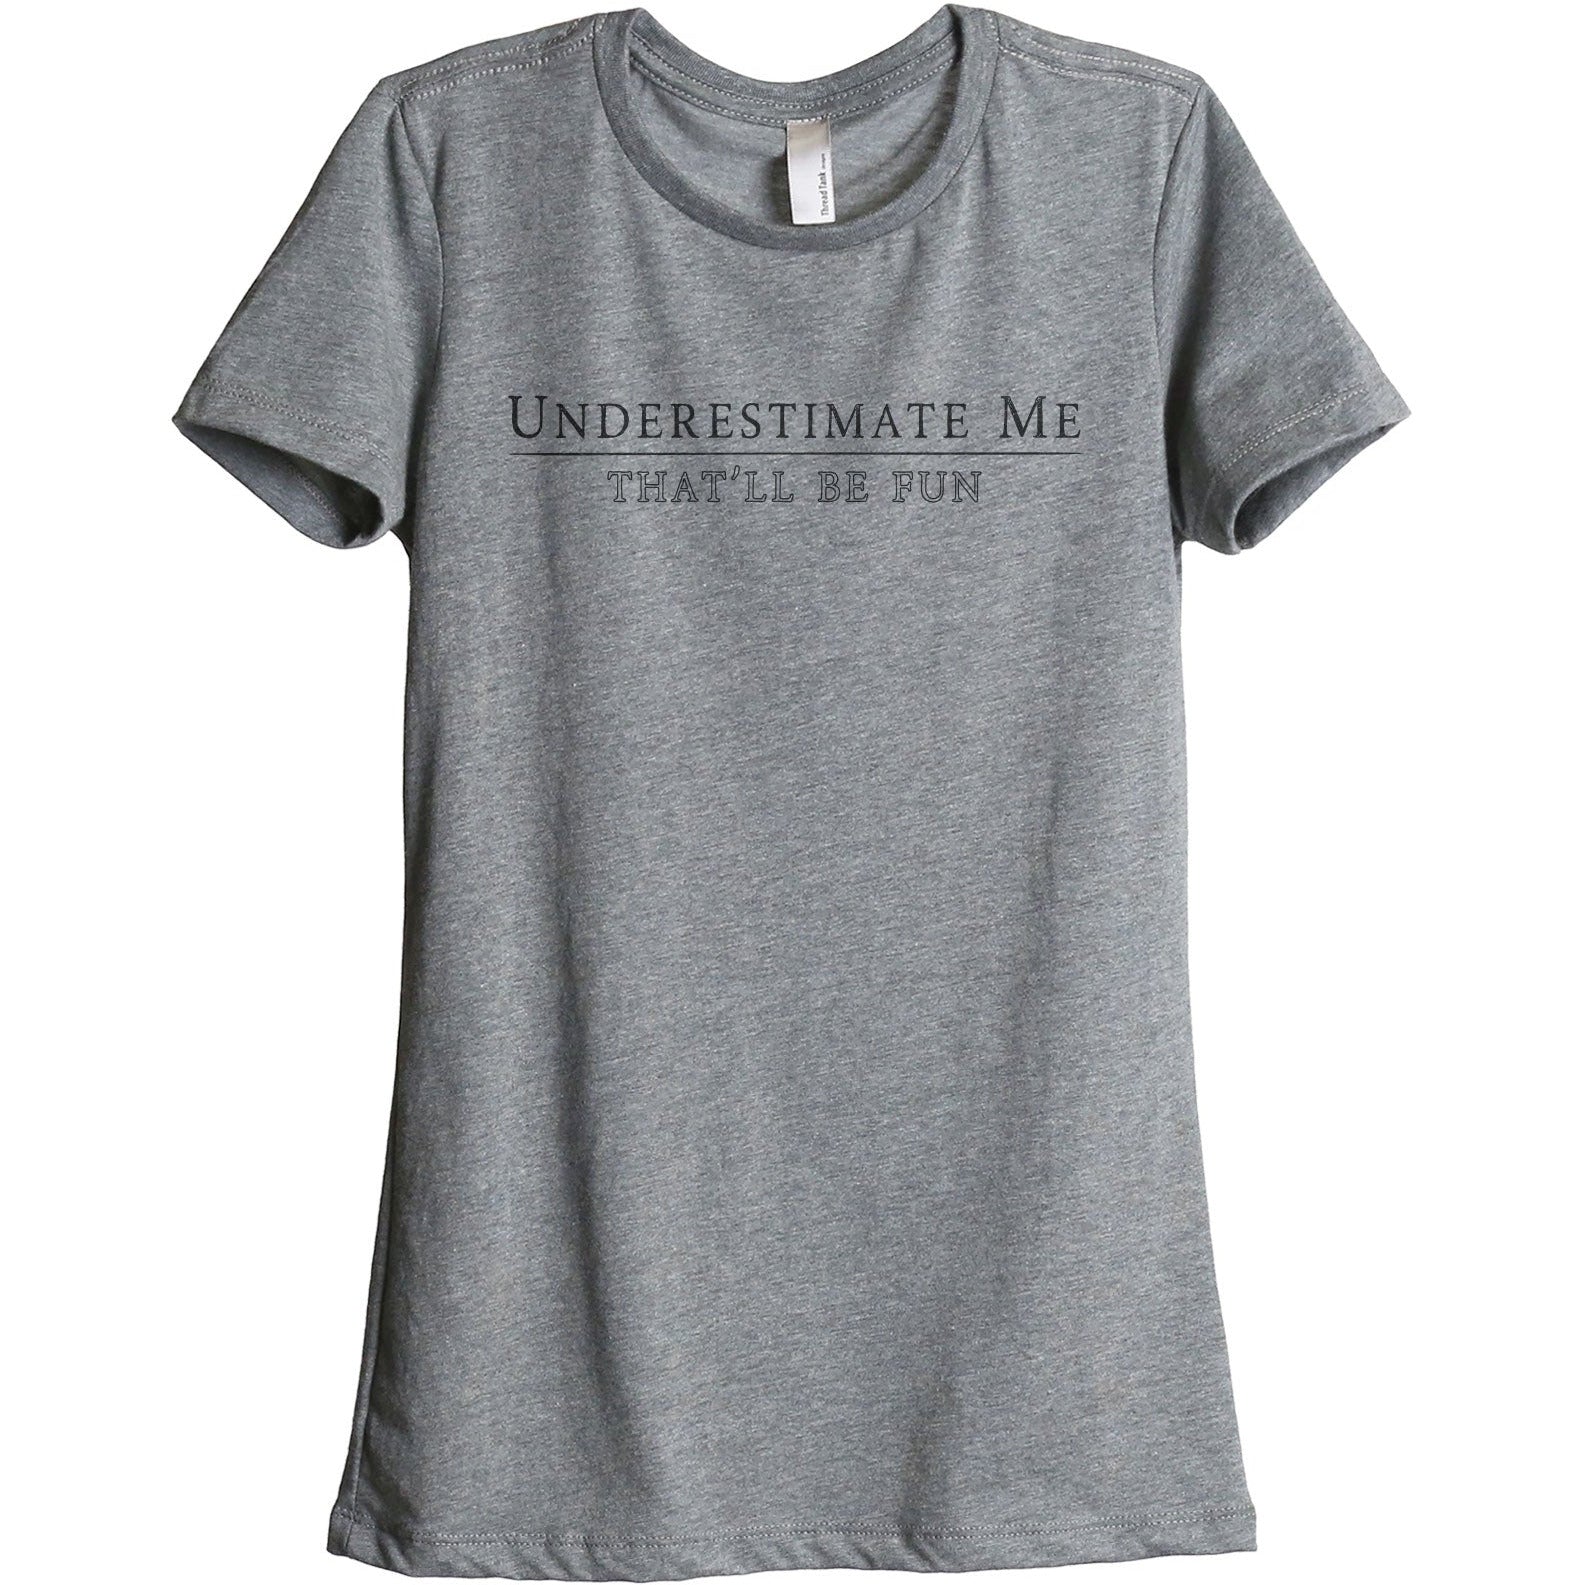 Underestimate Me - That'll Be Fun Women's Relaxed Crewneck T-Shirt Top Tee Heather Grey